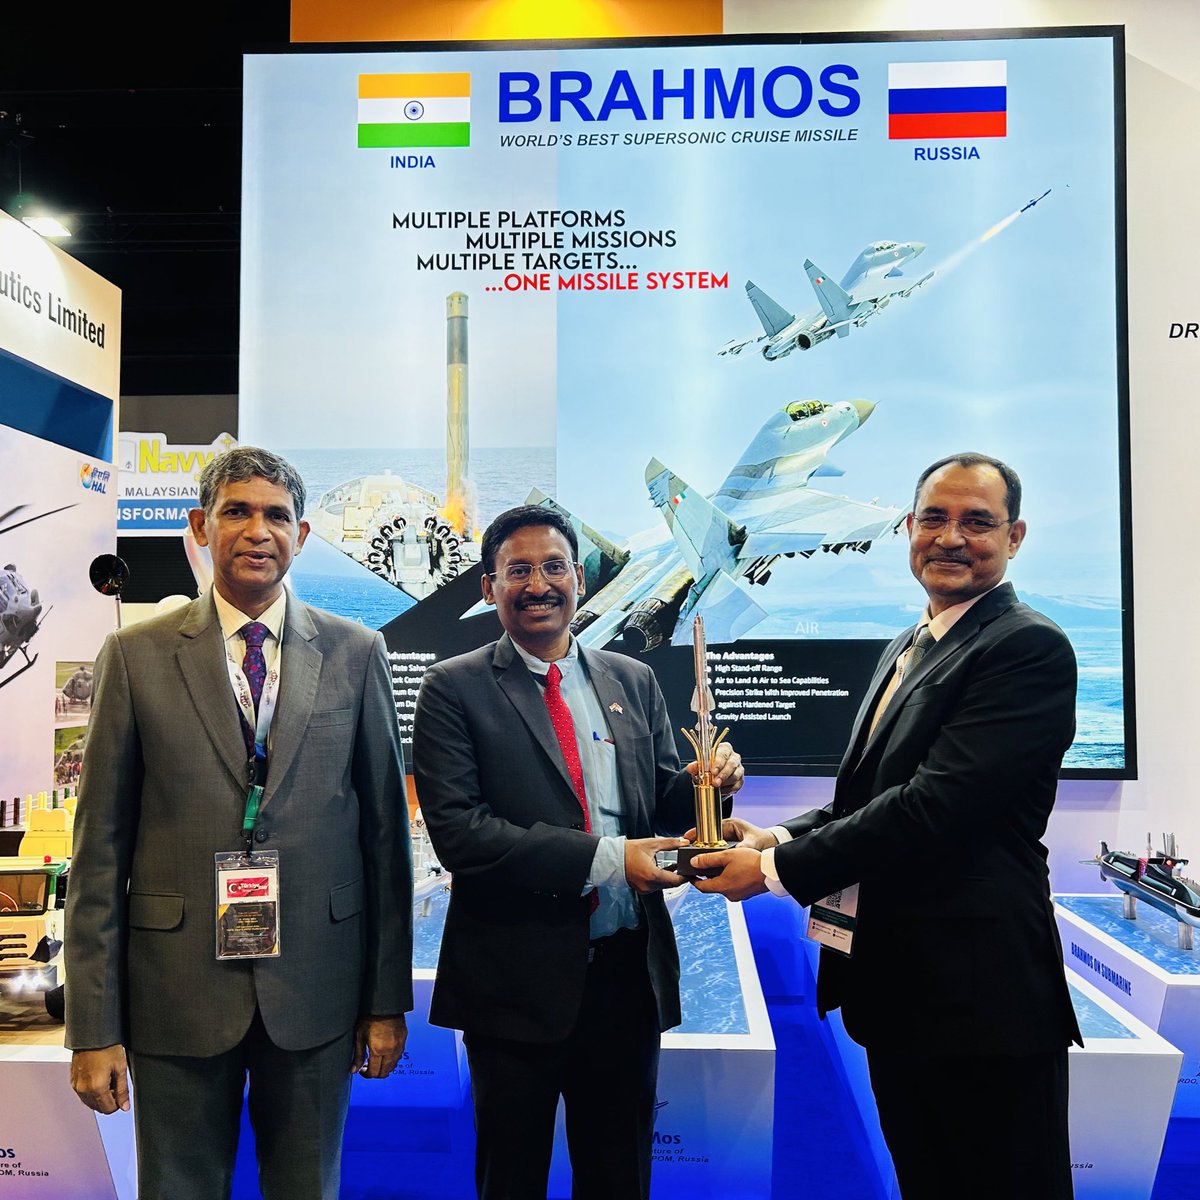 High Commissioner of India to Malaysia, H.E. Shri @BN_Reddy_8888, inaugurated the #BrahMos Pavilion on the opening day of @DSAMalaysia, in presence of Addl. Secretary, @DefProdnIndia, Shri T. Natarajan. They were apprised about the export efforts being undertaken in various